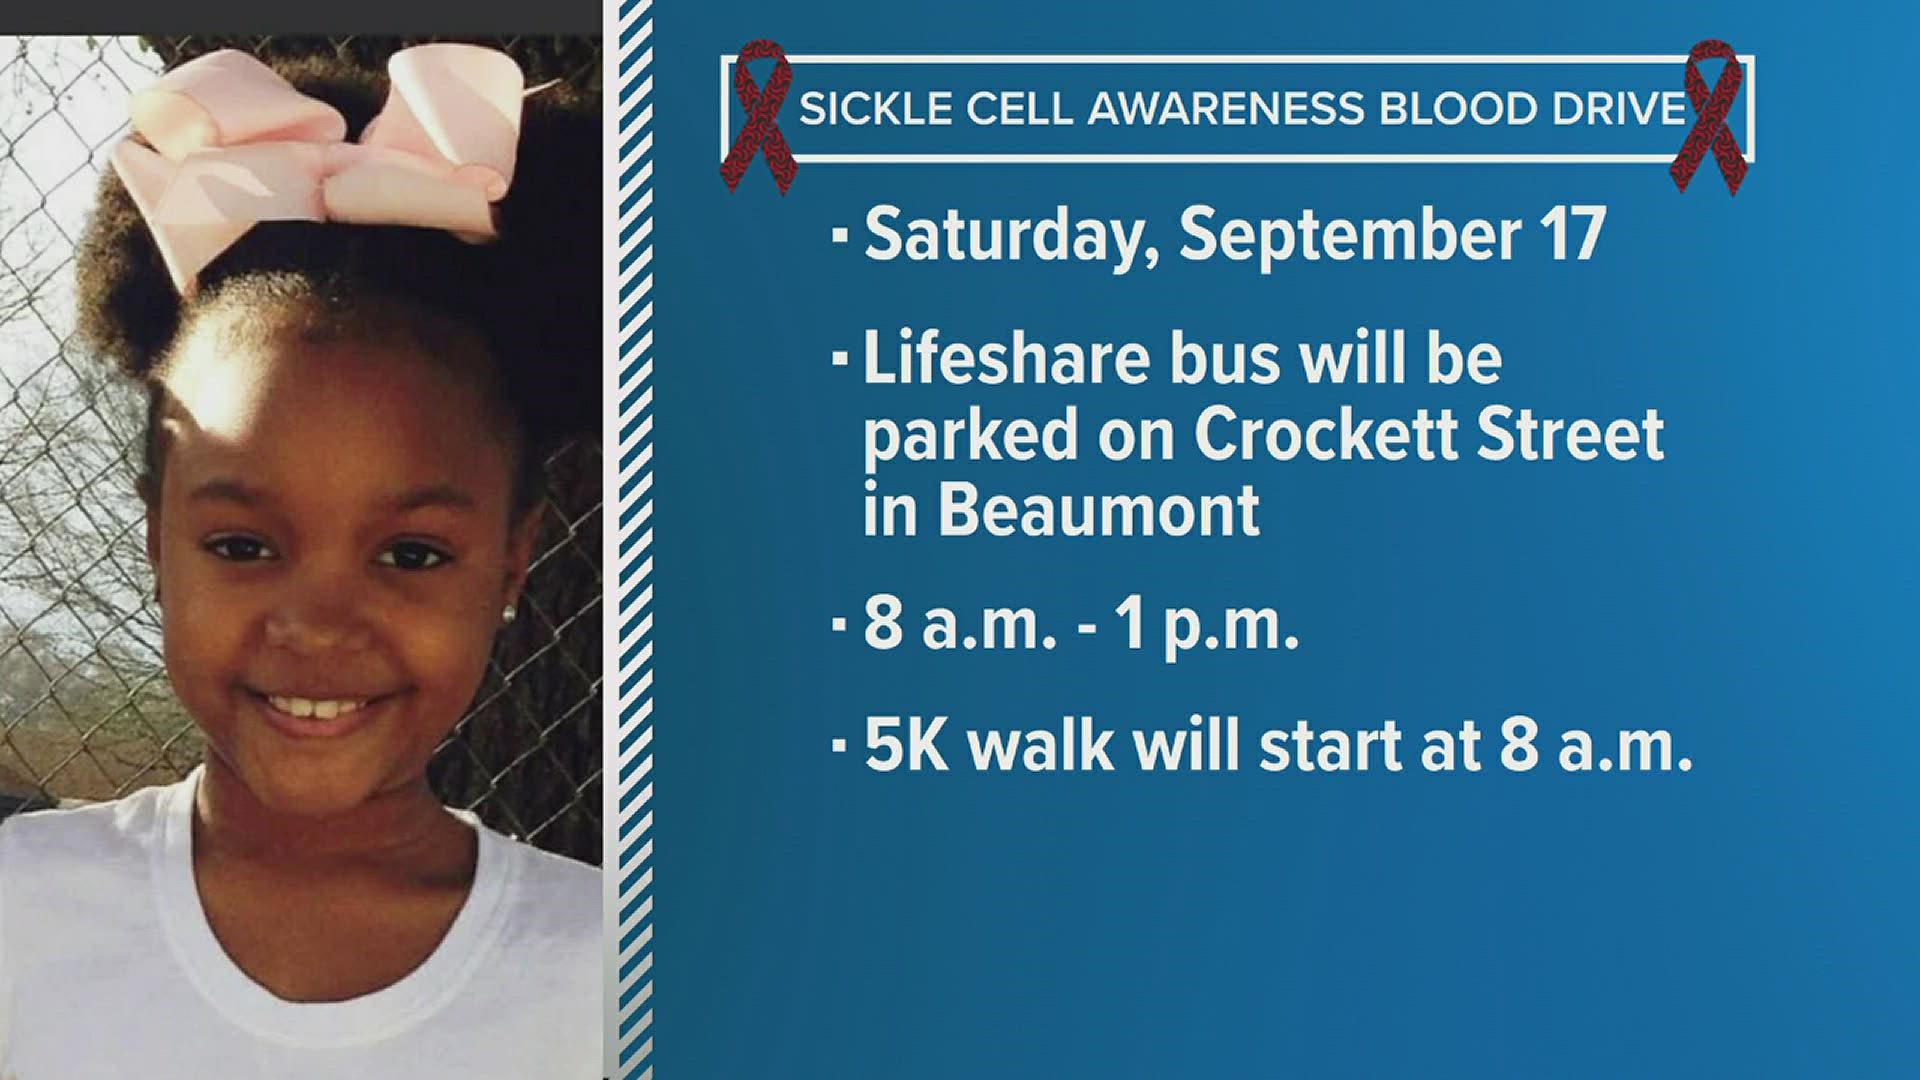 In honor of a little girl who lost her battle to sickle cell anemia, two non-profit organizations are working together to raise awareness and hopefully save lives.